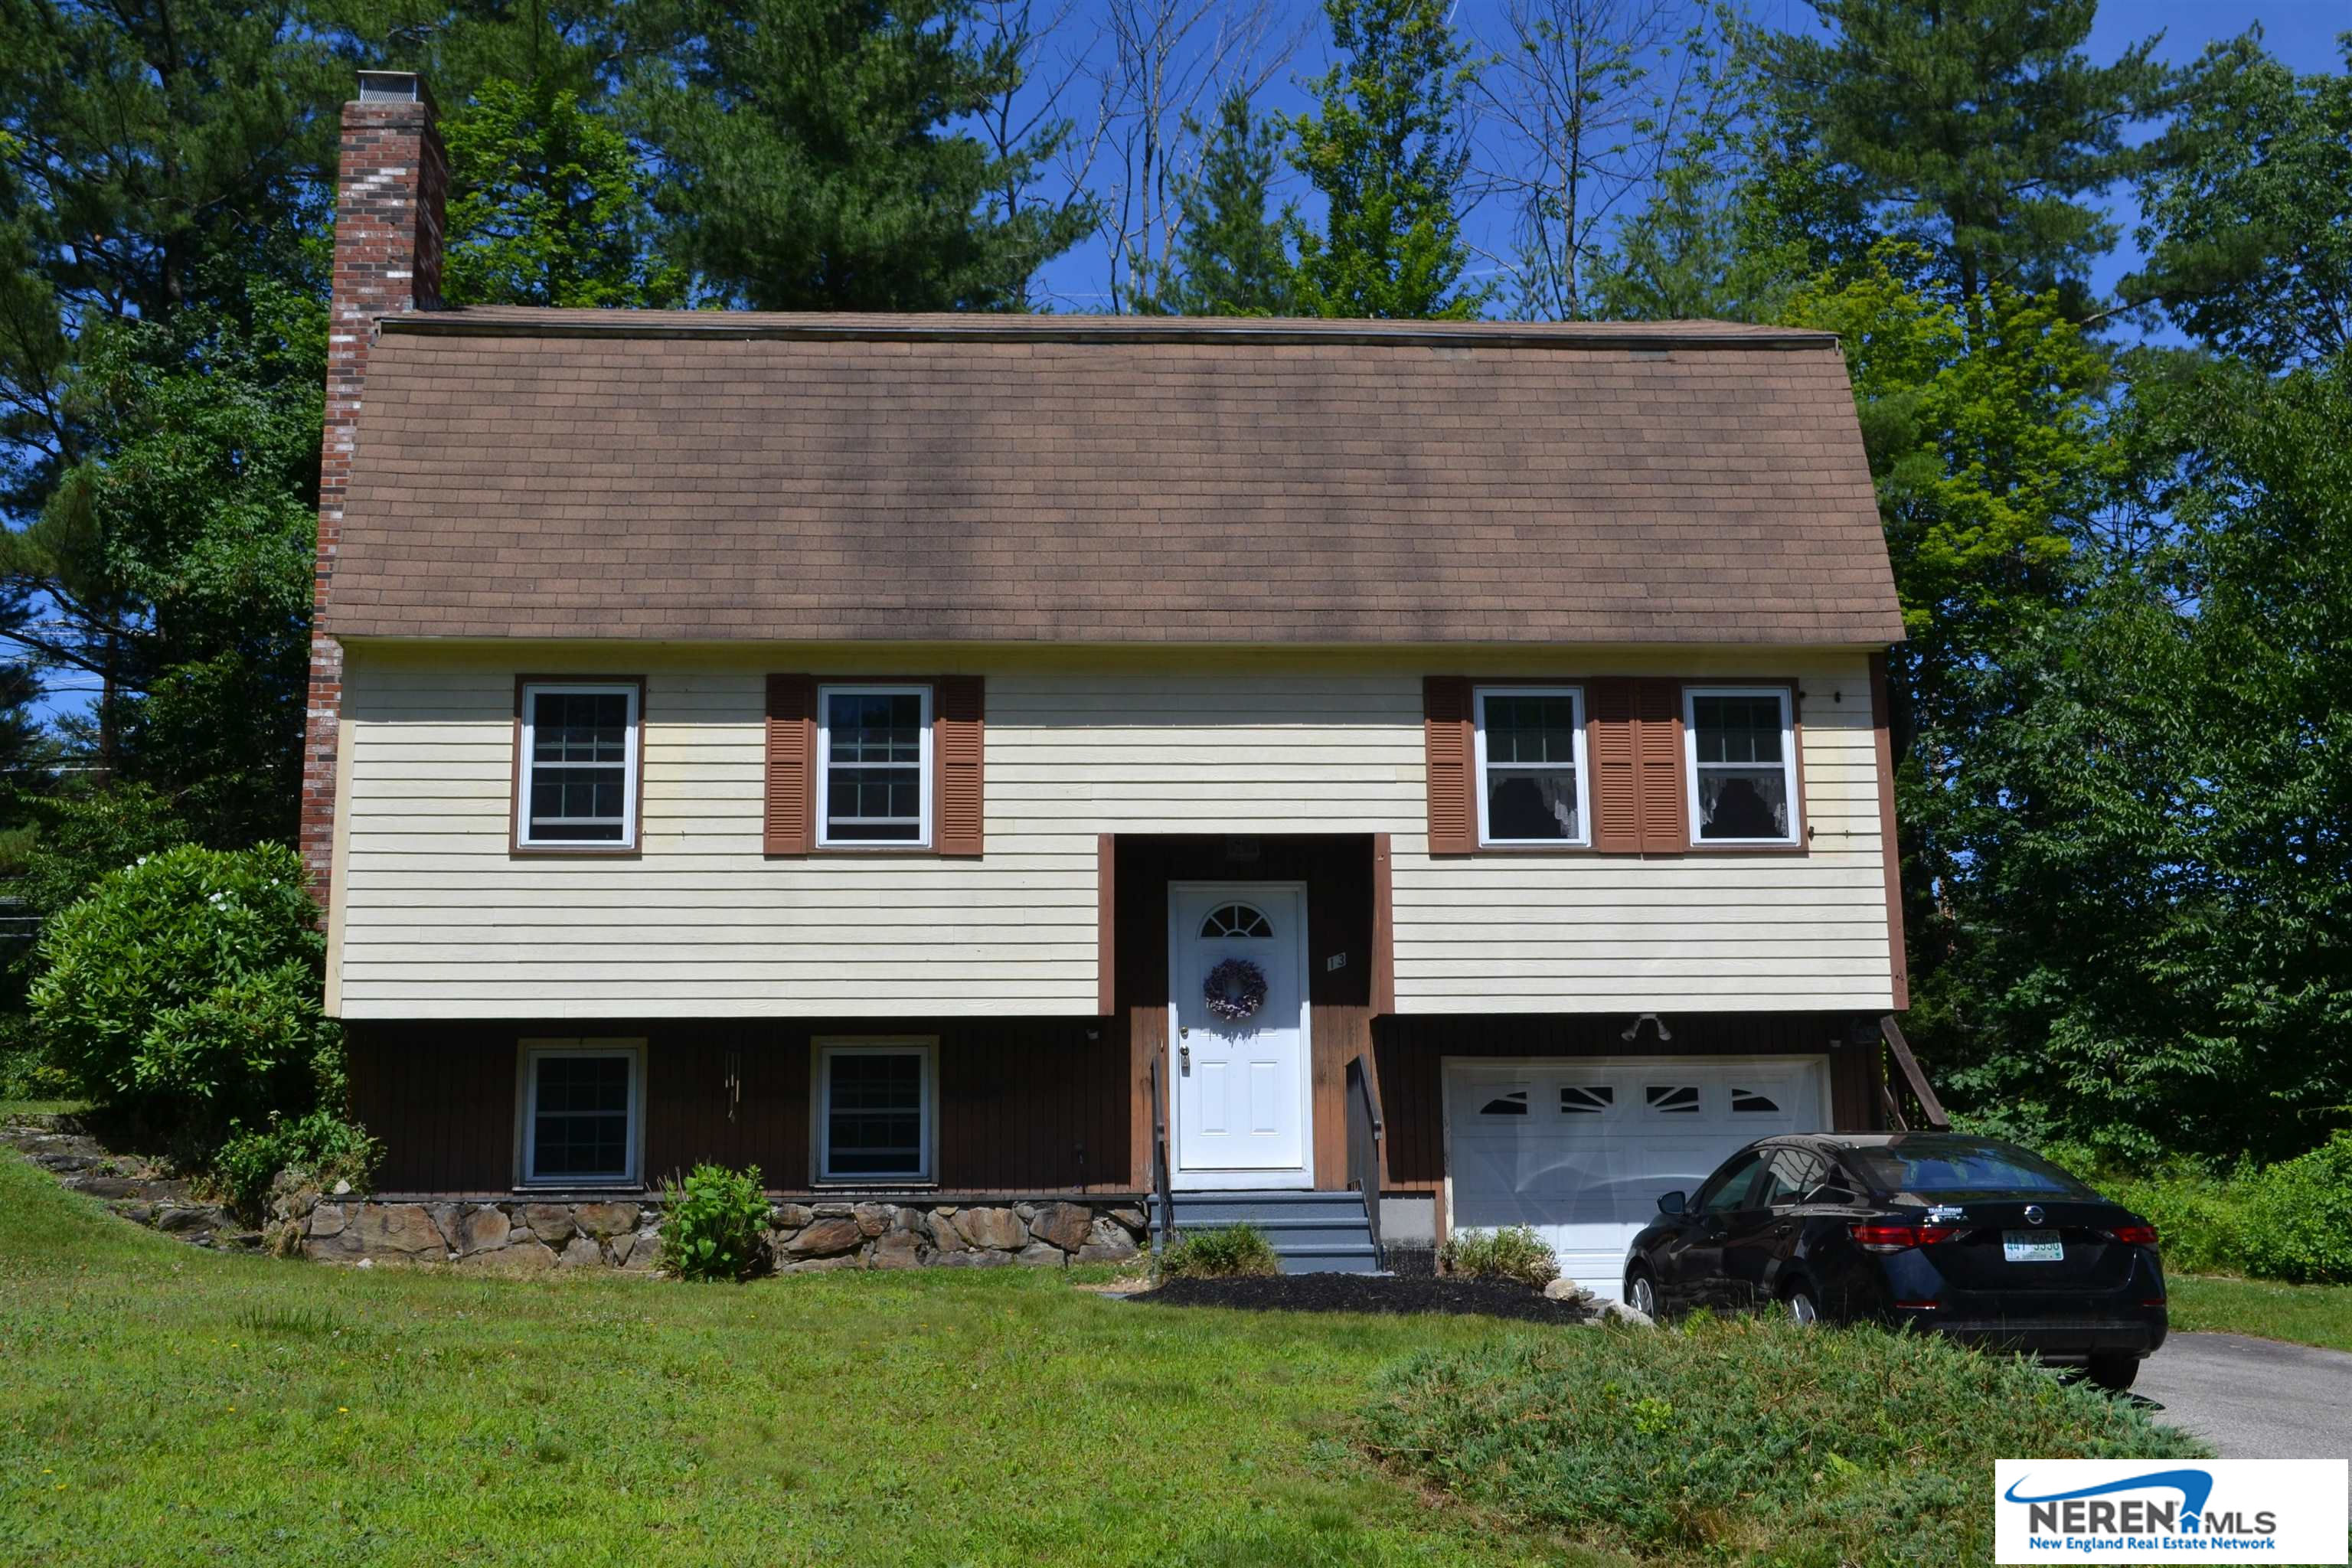 13 Chestnut Hill Drive, Londonderry, NH 03053